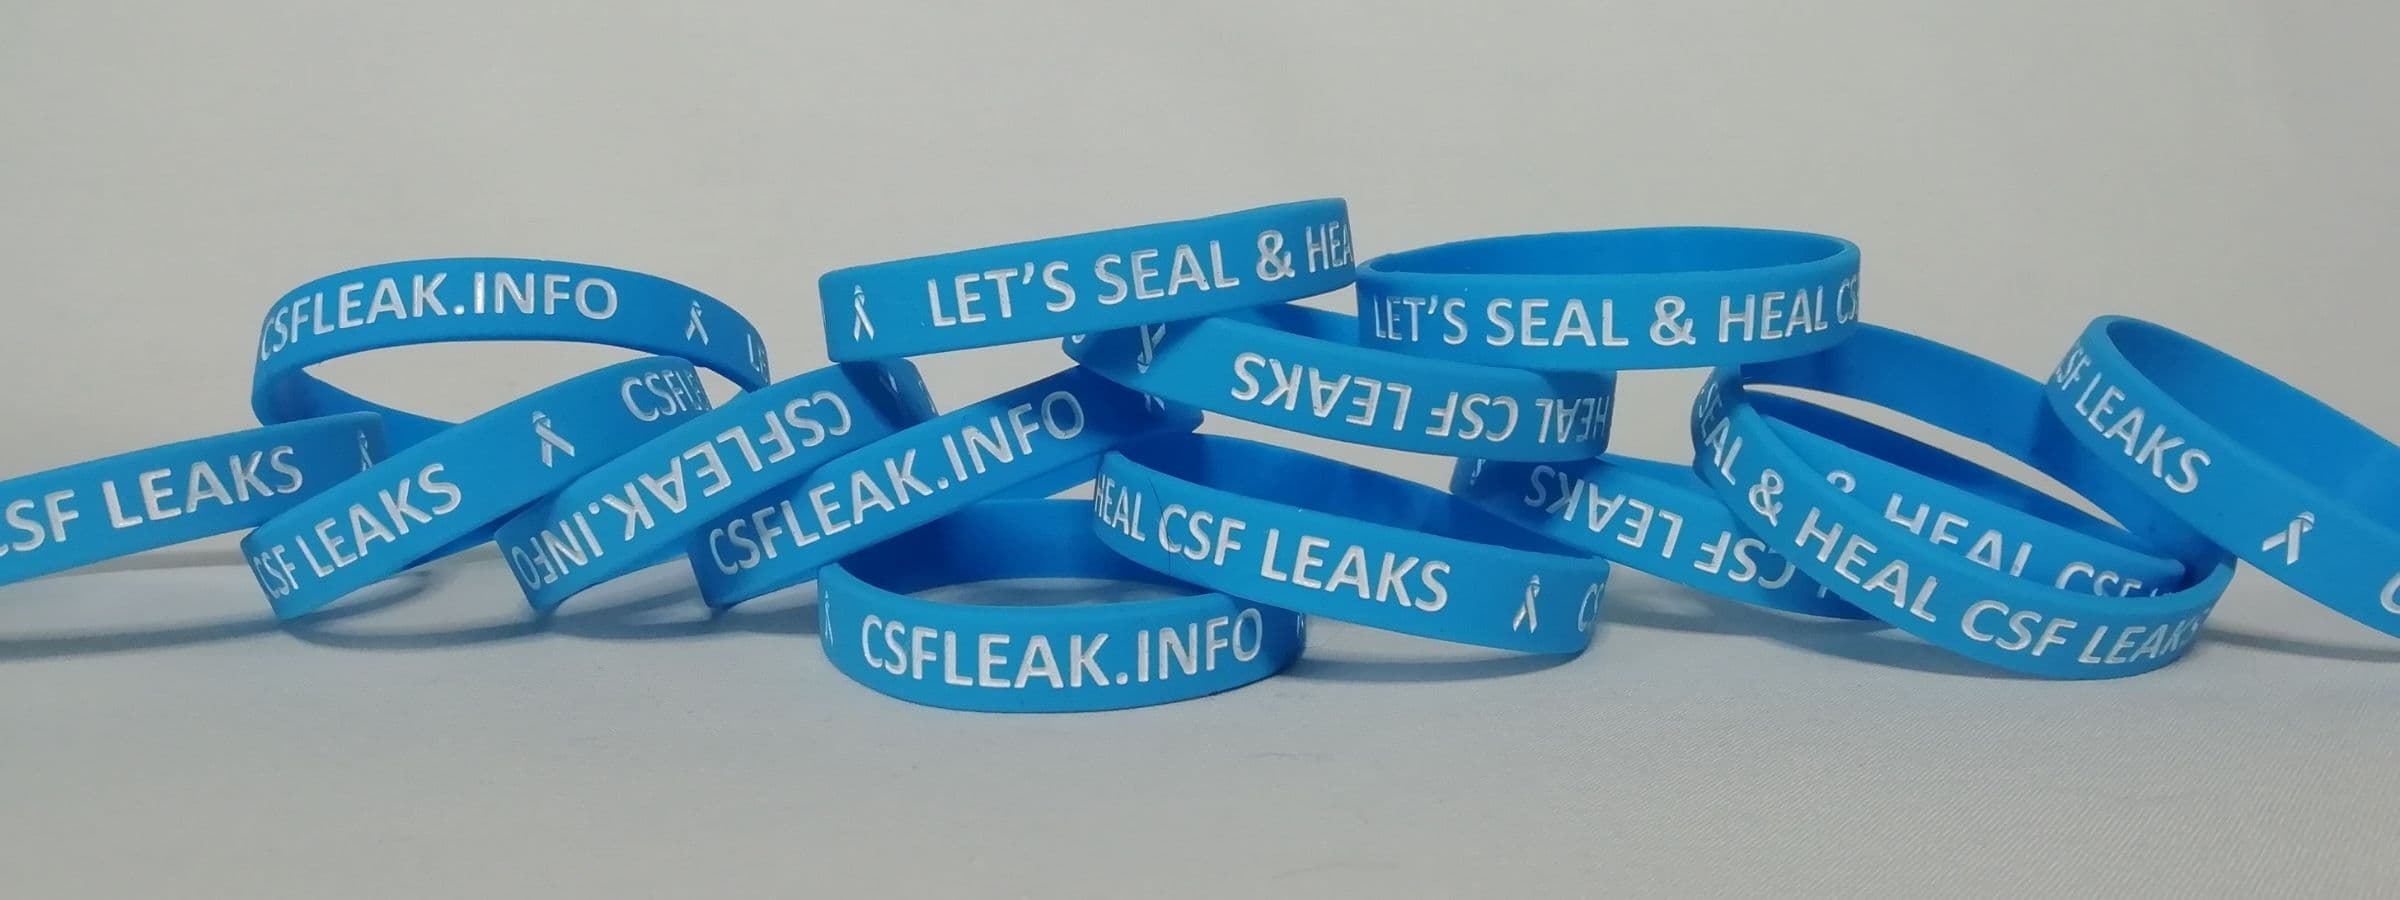 A pile of blue wristbands that say "CSFLEAK.info" on them.